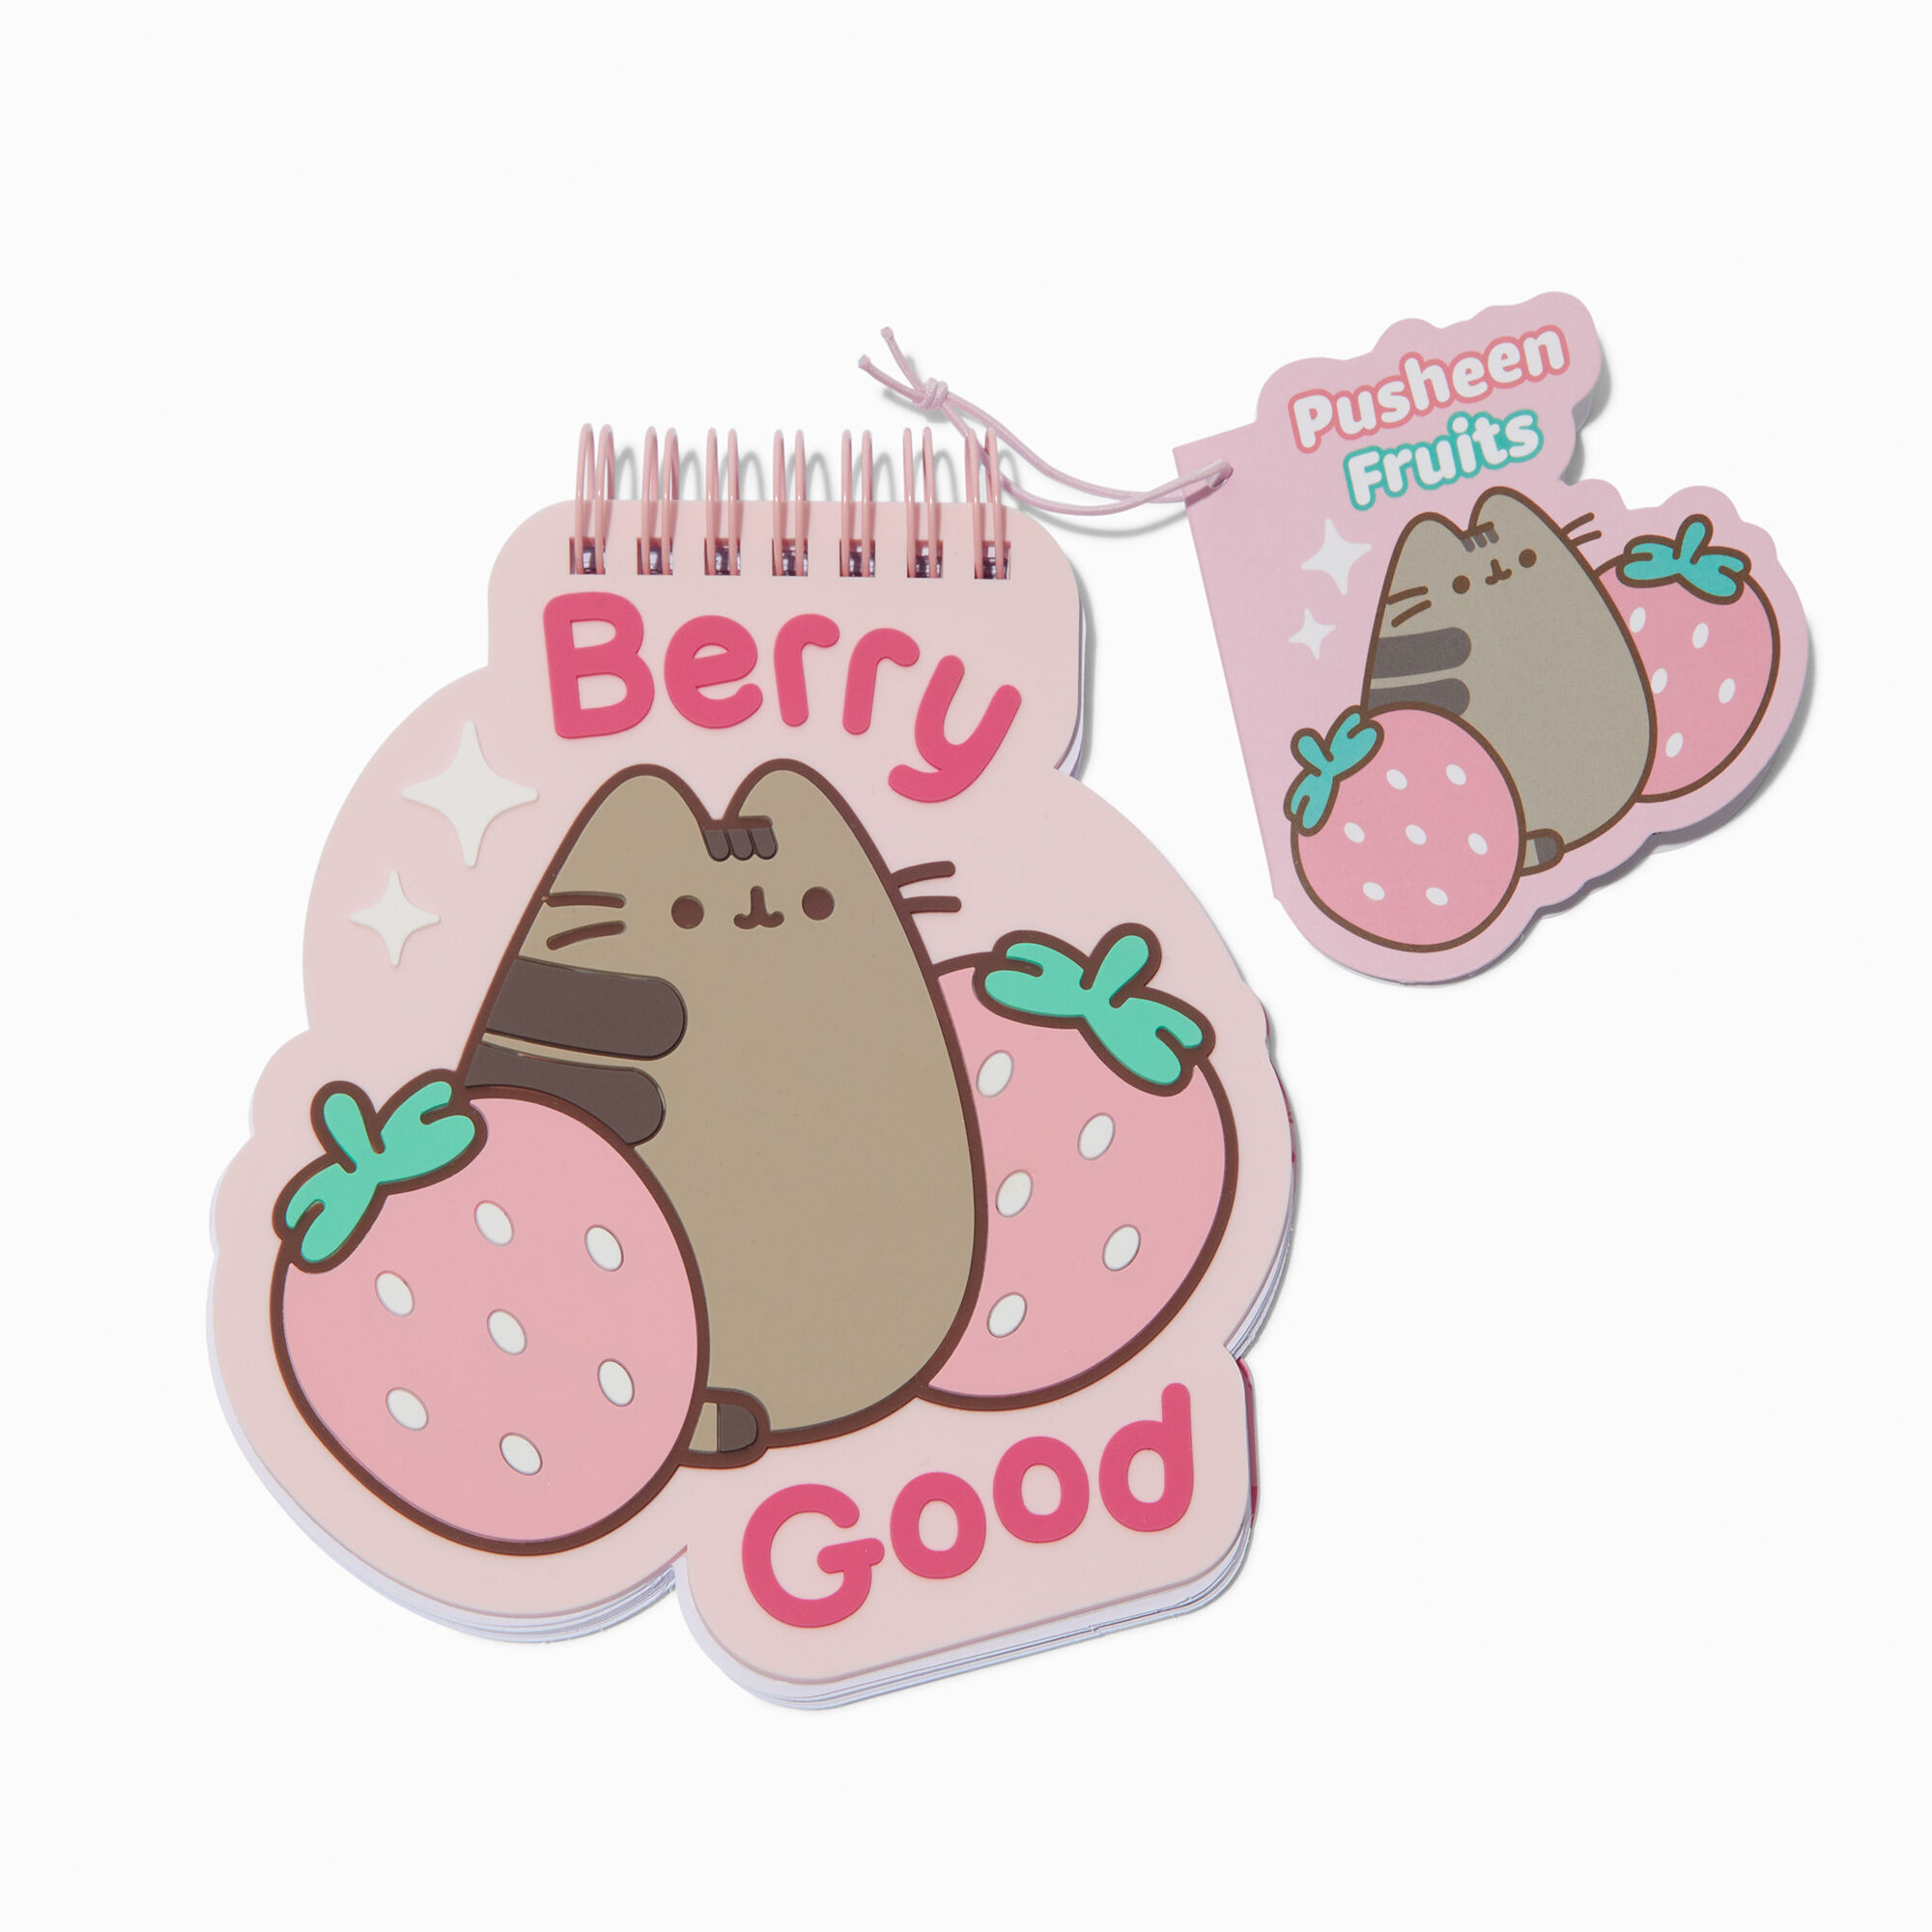 View Claires Pusheen Fruits Mini Notebook information